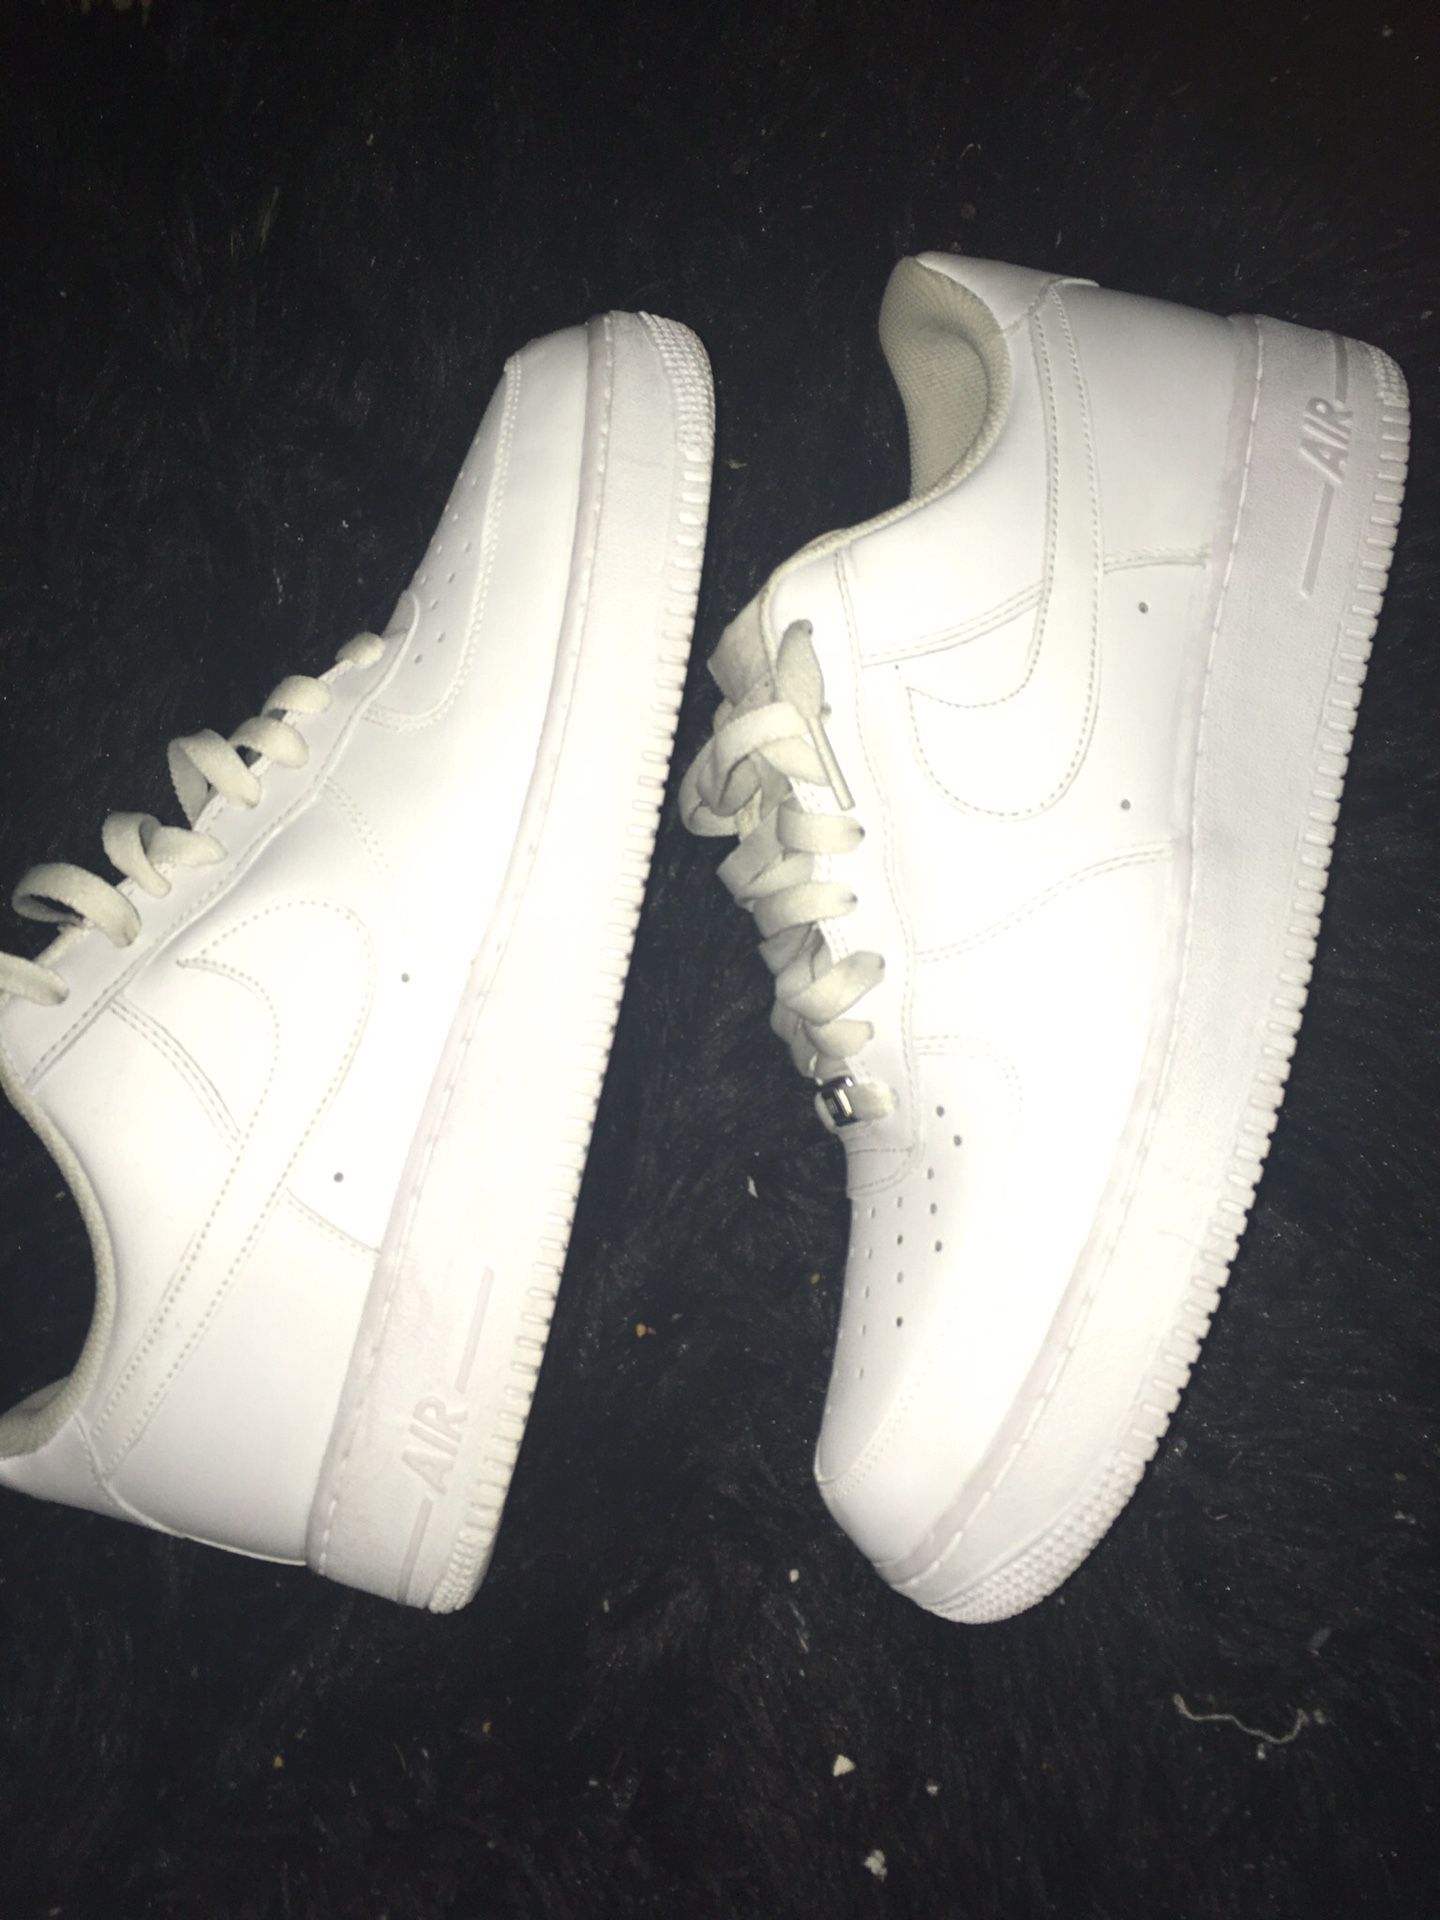 Nike sAir Force 1 (White) SIZE 11.5 **I ACCEPT OFFERS!!**READ DESCRIPTION!!**ONLY 3 DAYS LEFT!!